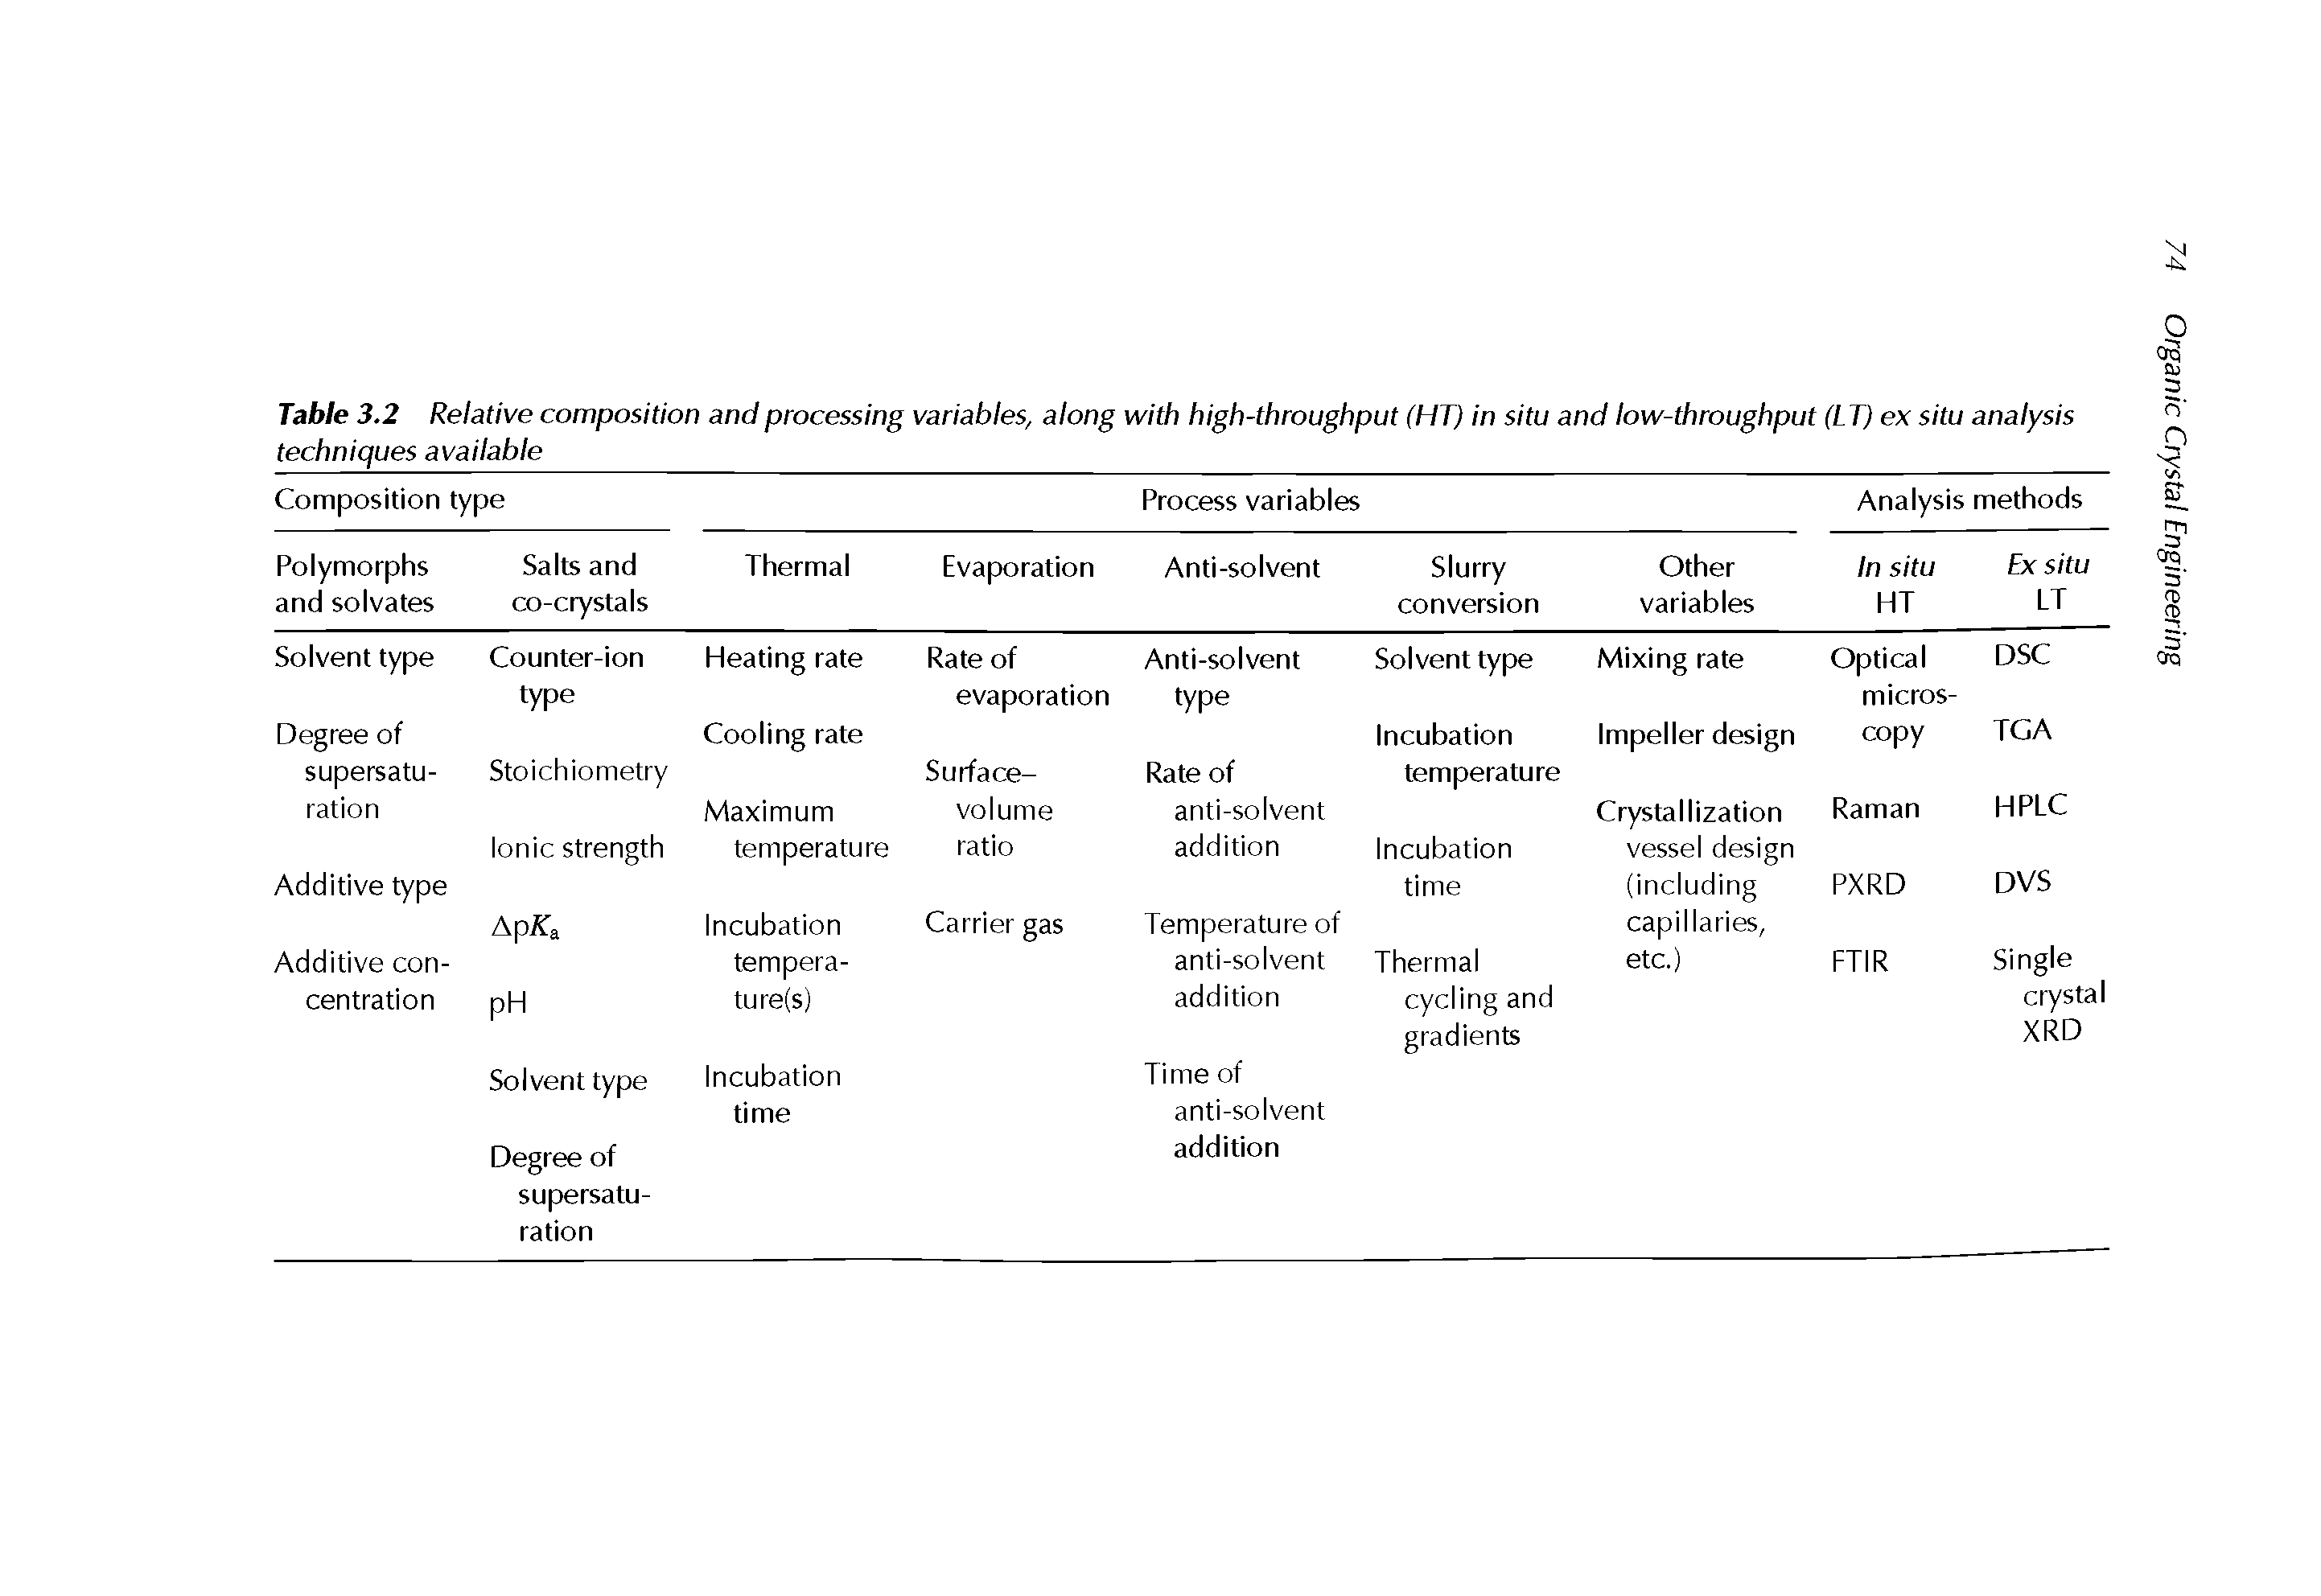 Table 3.2 Relative composition and processing variables, along with high-throughput (HT) in situ and low-throughput (LT) ex situ analysis techniques available...